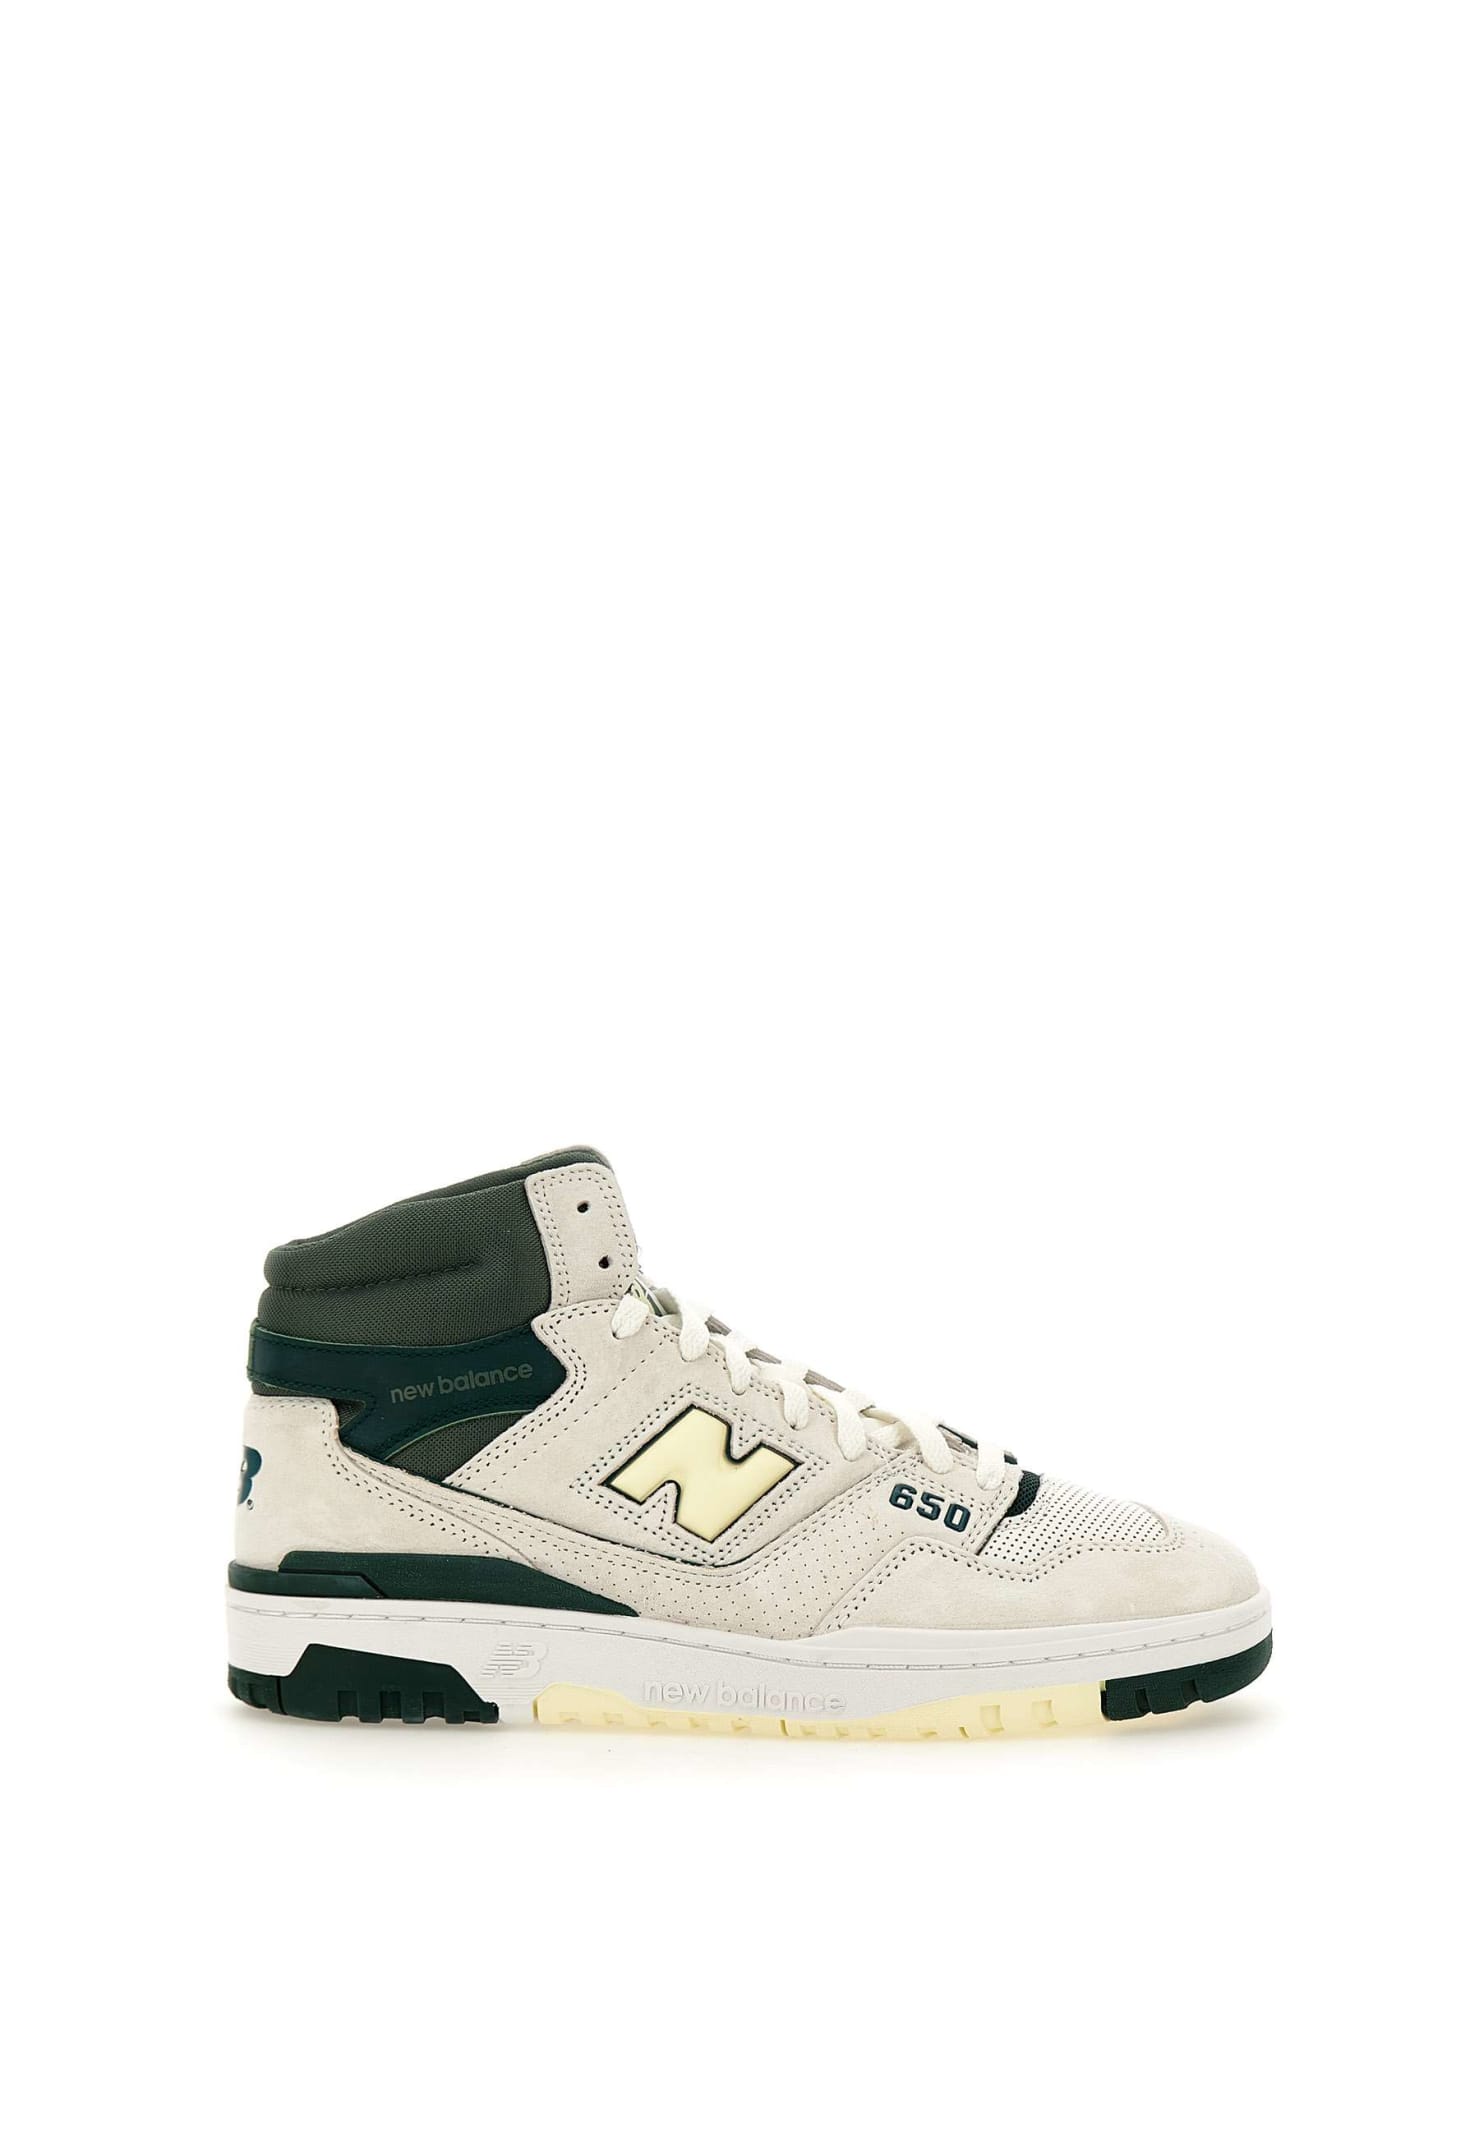 NEW BALANCE 550 LEATHER AND SUEDE SNEAKERS